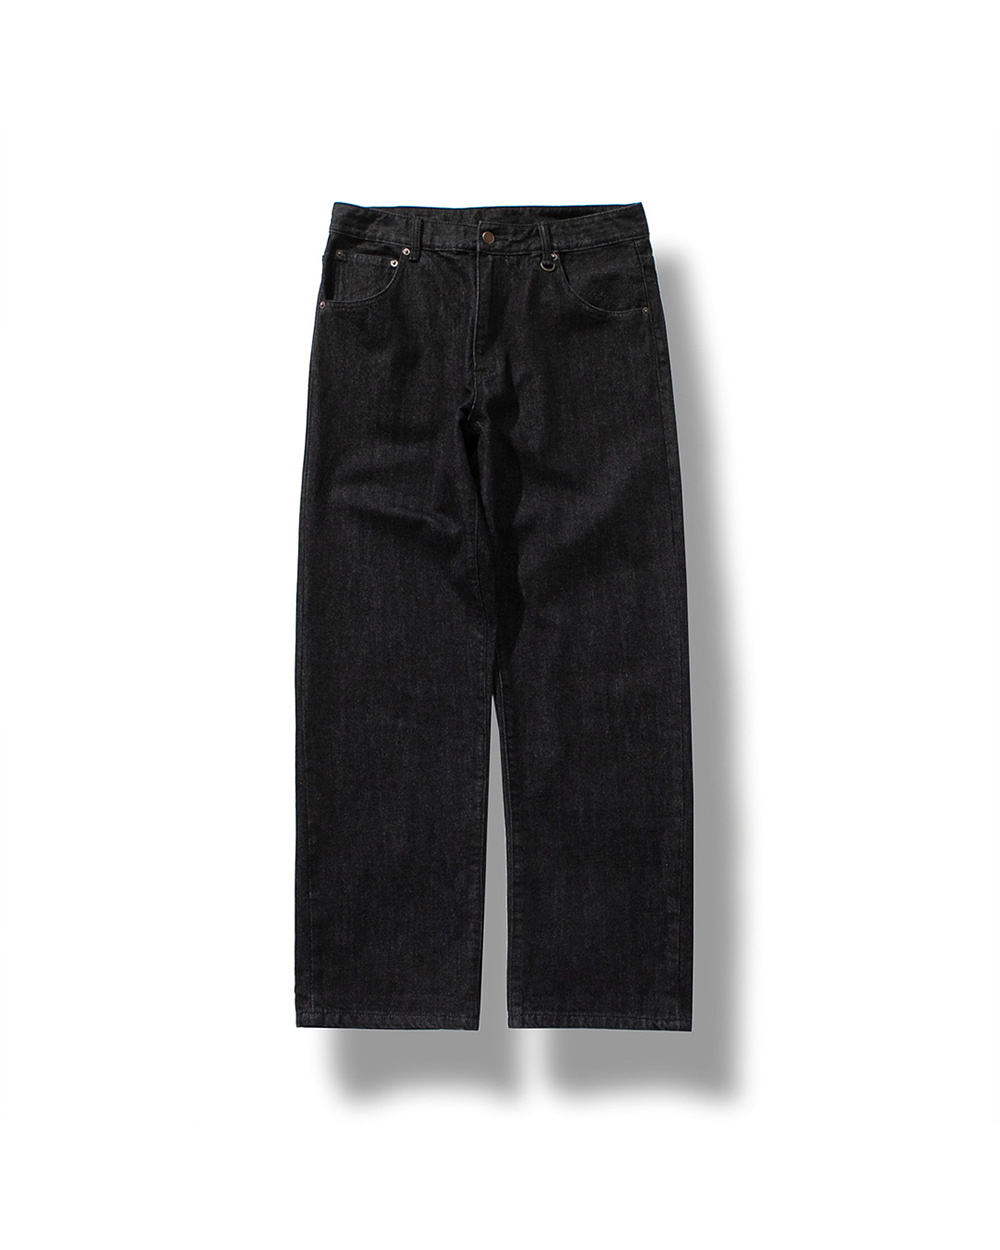 ALL SUNDAY JEANS TAPERED BLACK